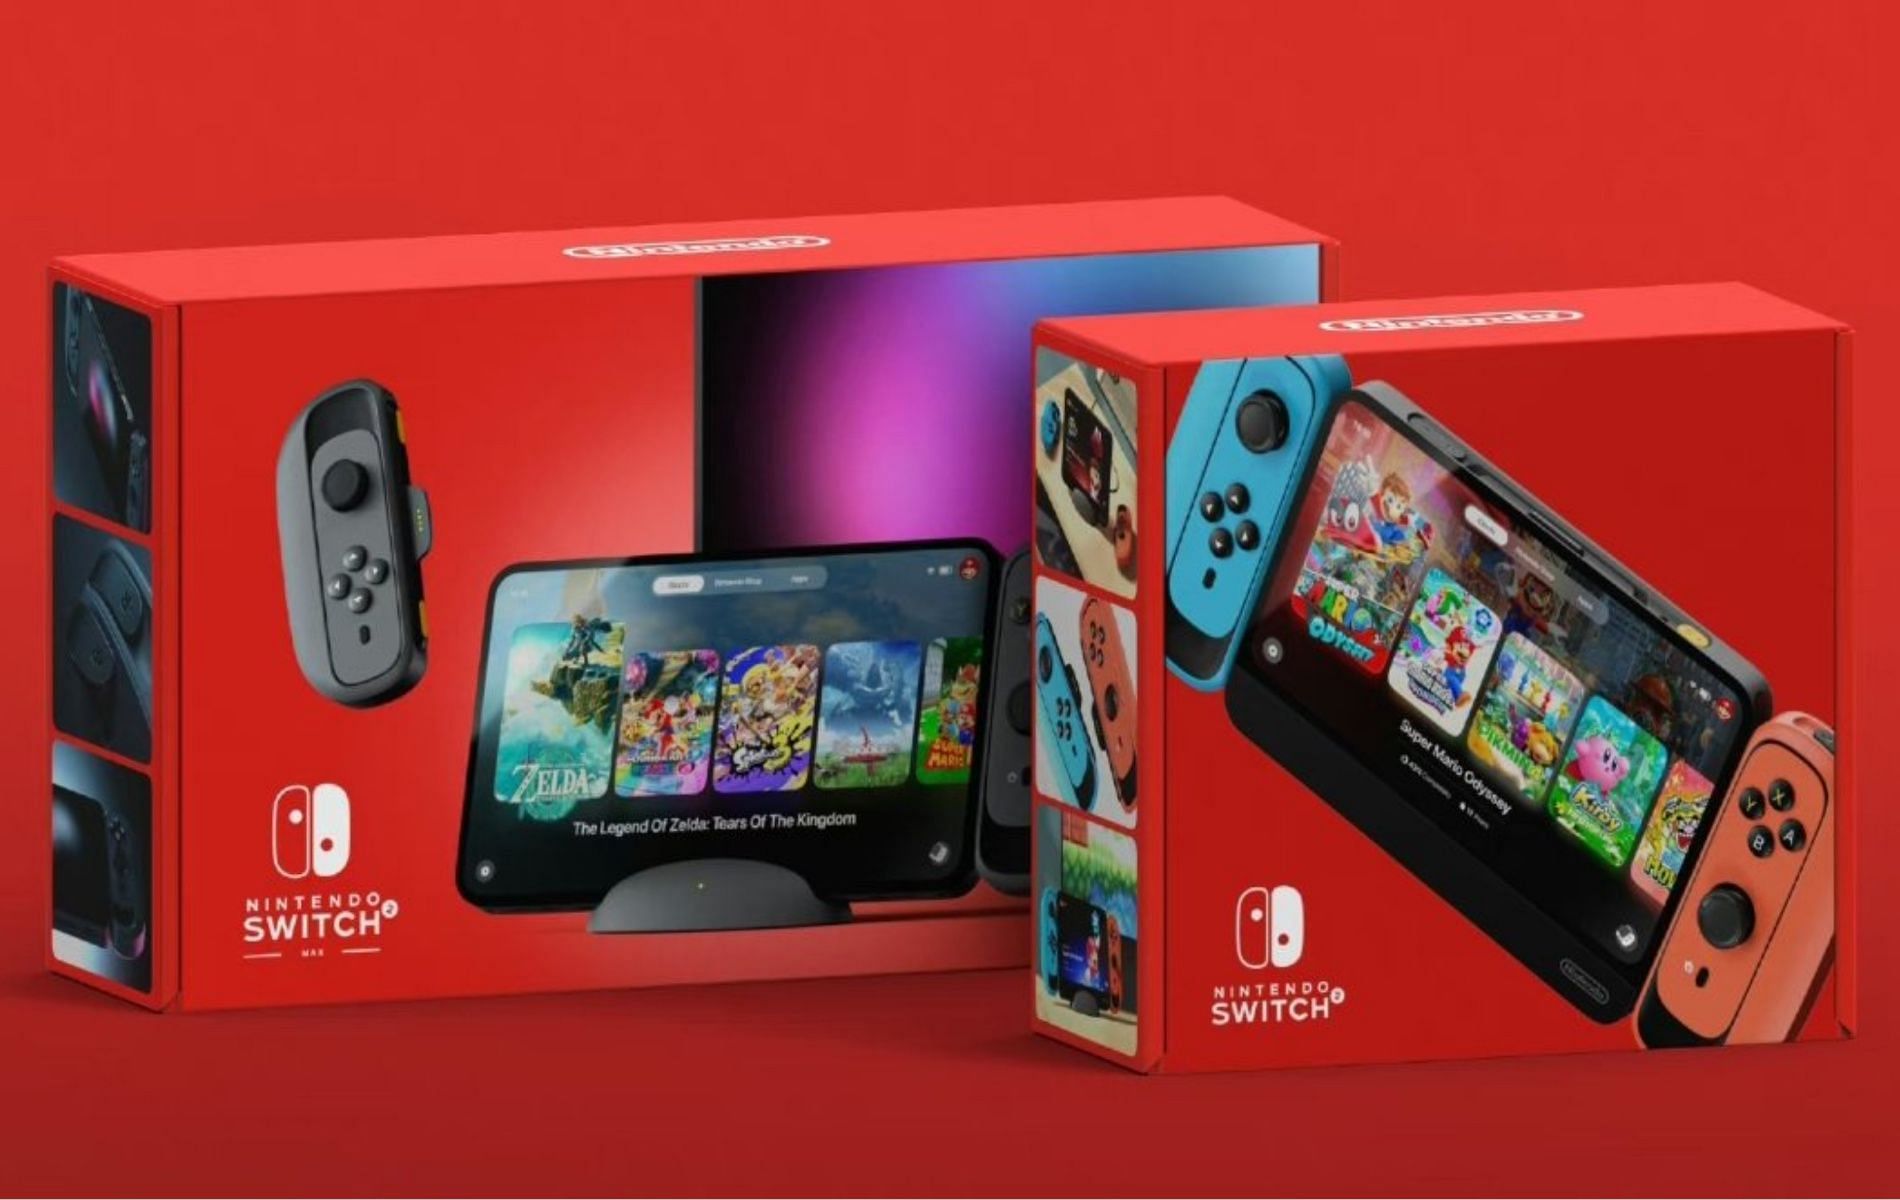 Nintendo Switch 2 leaked box shows off console design, UI, and more